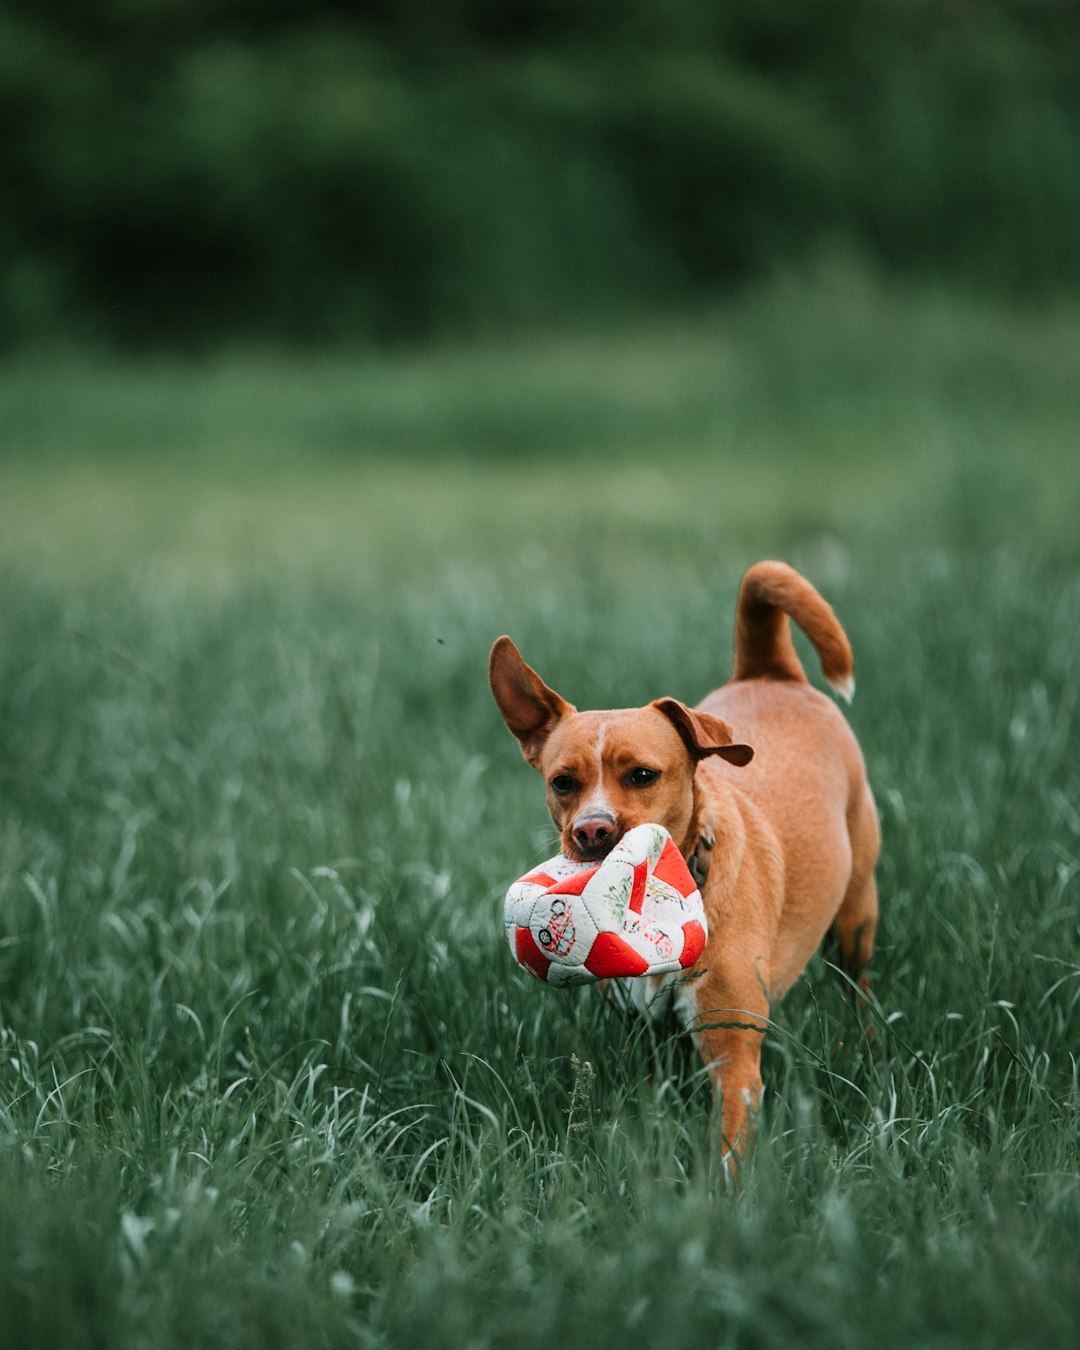 brown short coated dog playing with white and black soccer ball on green grass field during